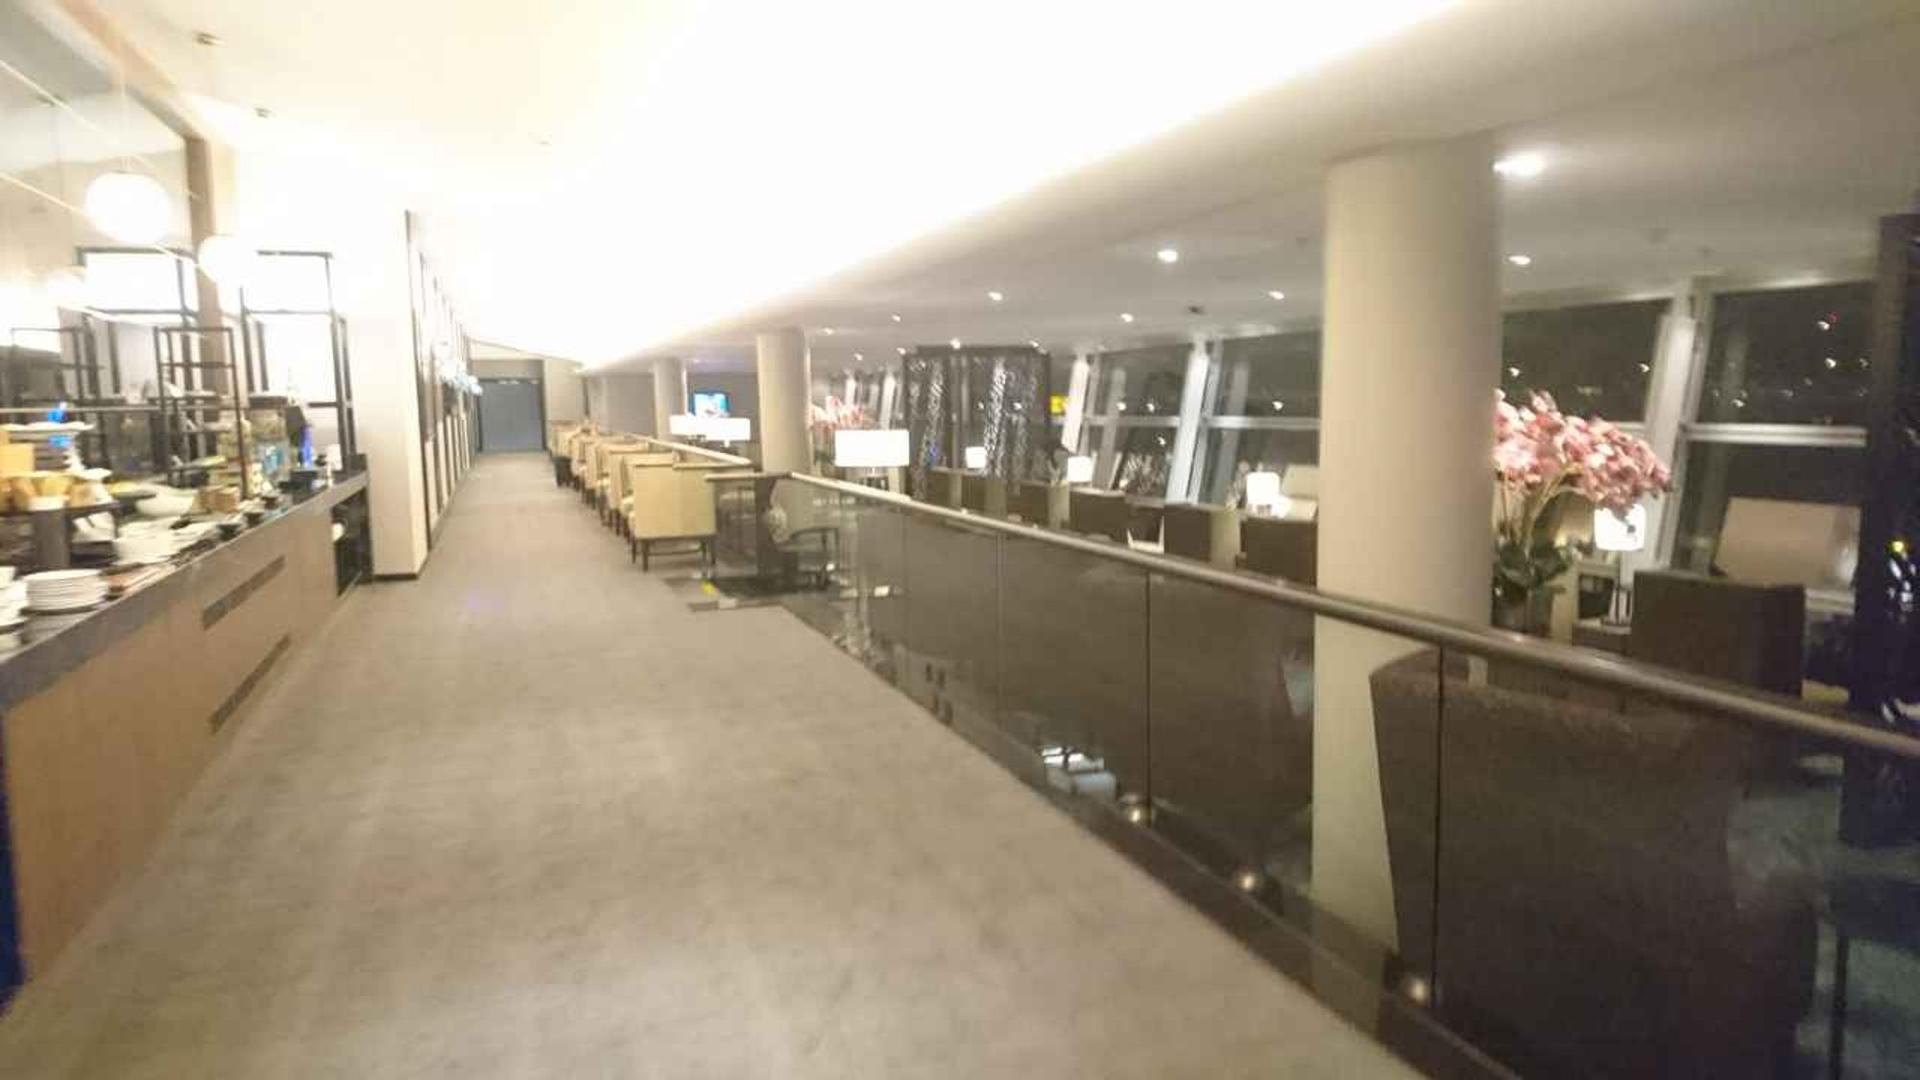 Malaysia Airlines Platinum Lounge image 25 of 26